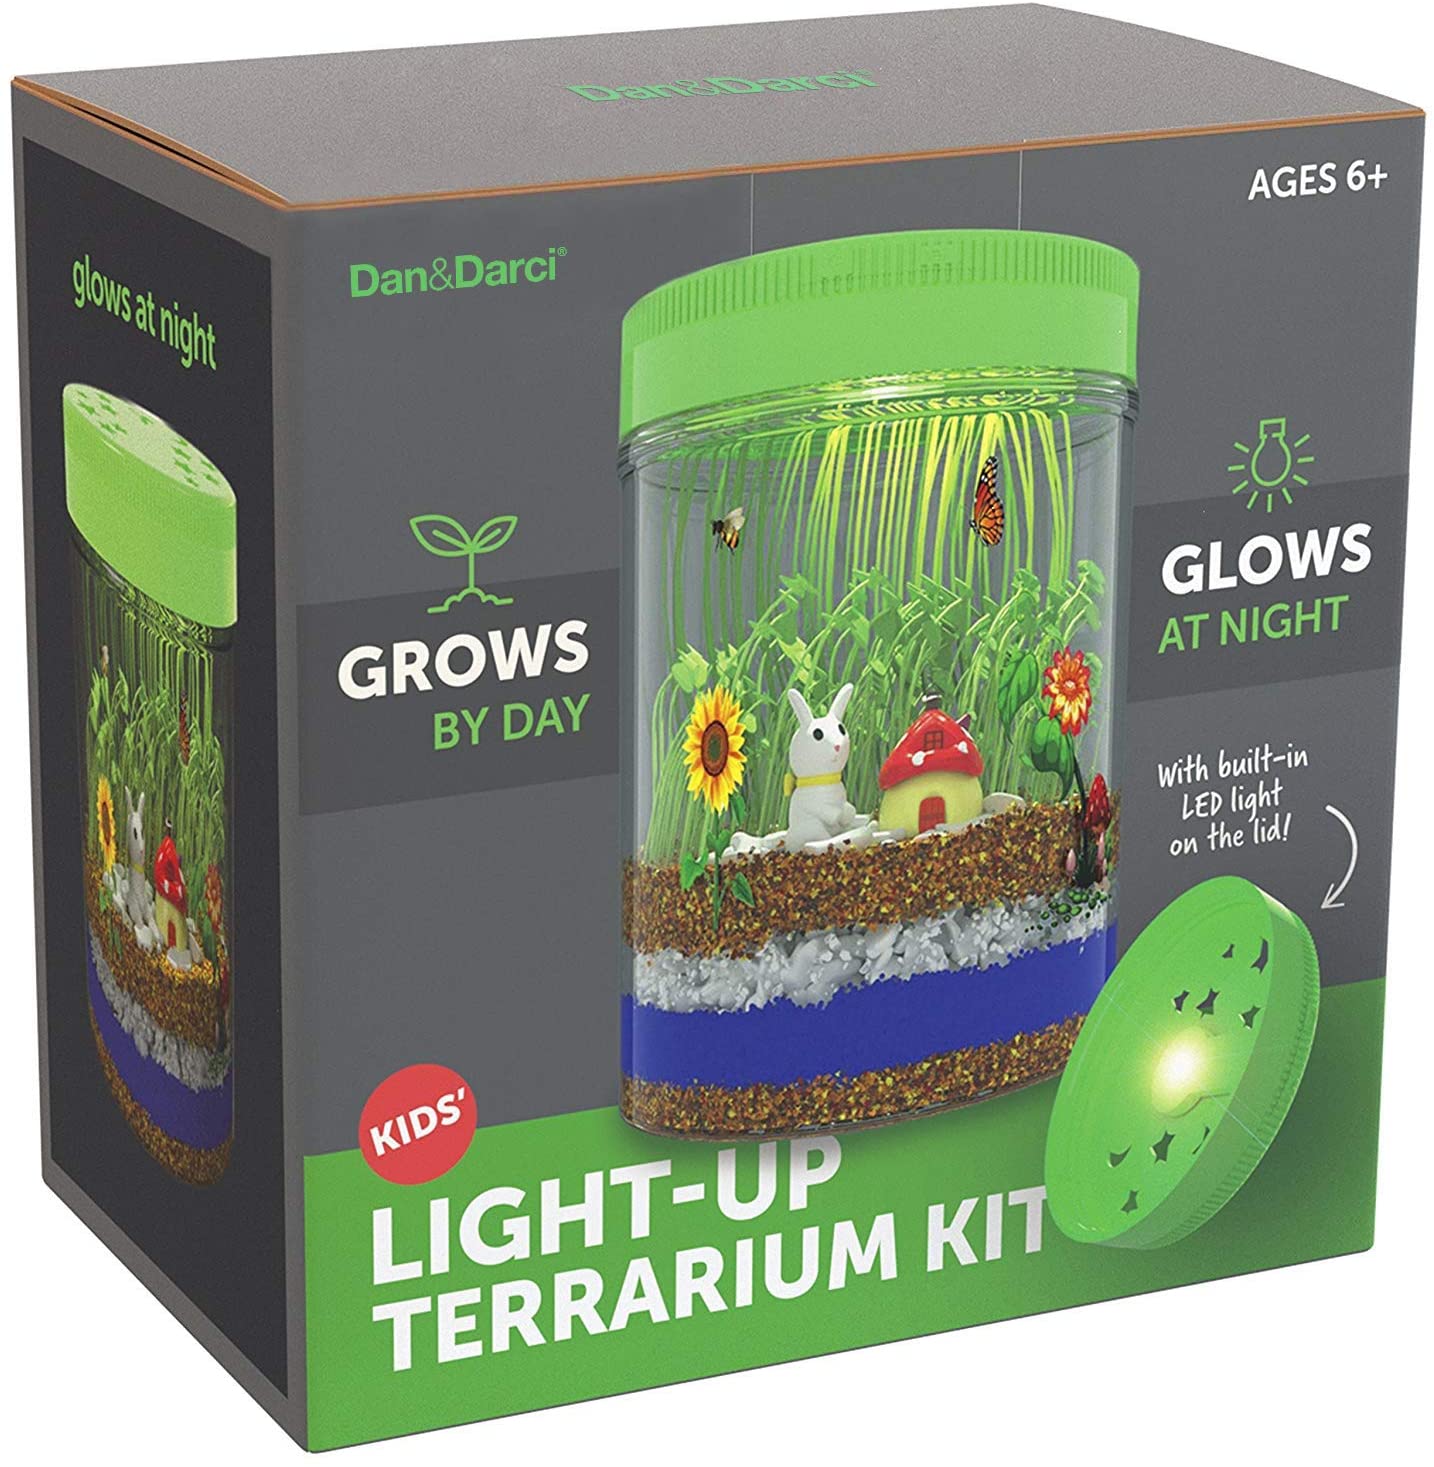 Light-Up Terrarium Kit for Kids - STEM Activities Science Craft Kits - Kids Crafts Gifts for Kids - Educational Kids Toys - Arts and Crafts for Girls